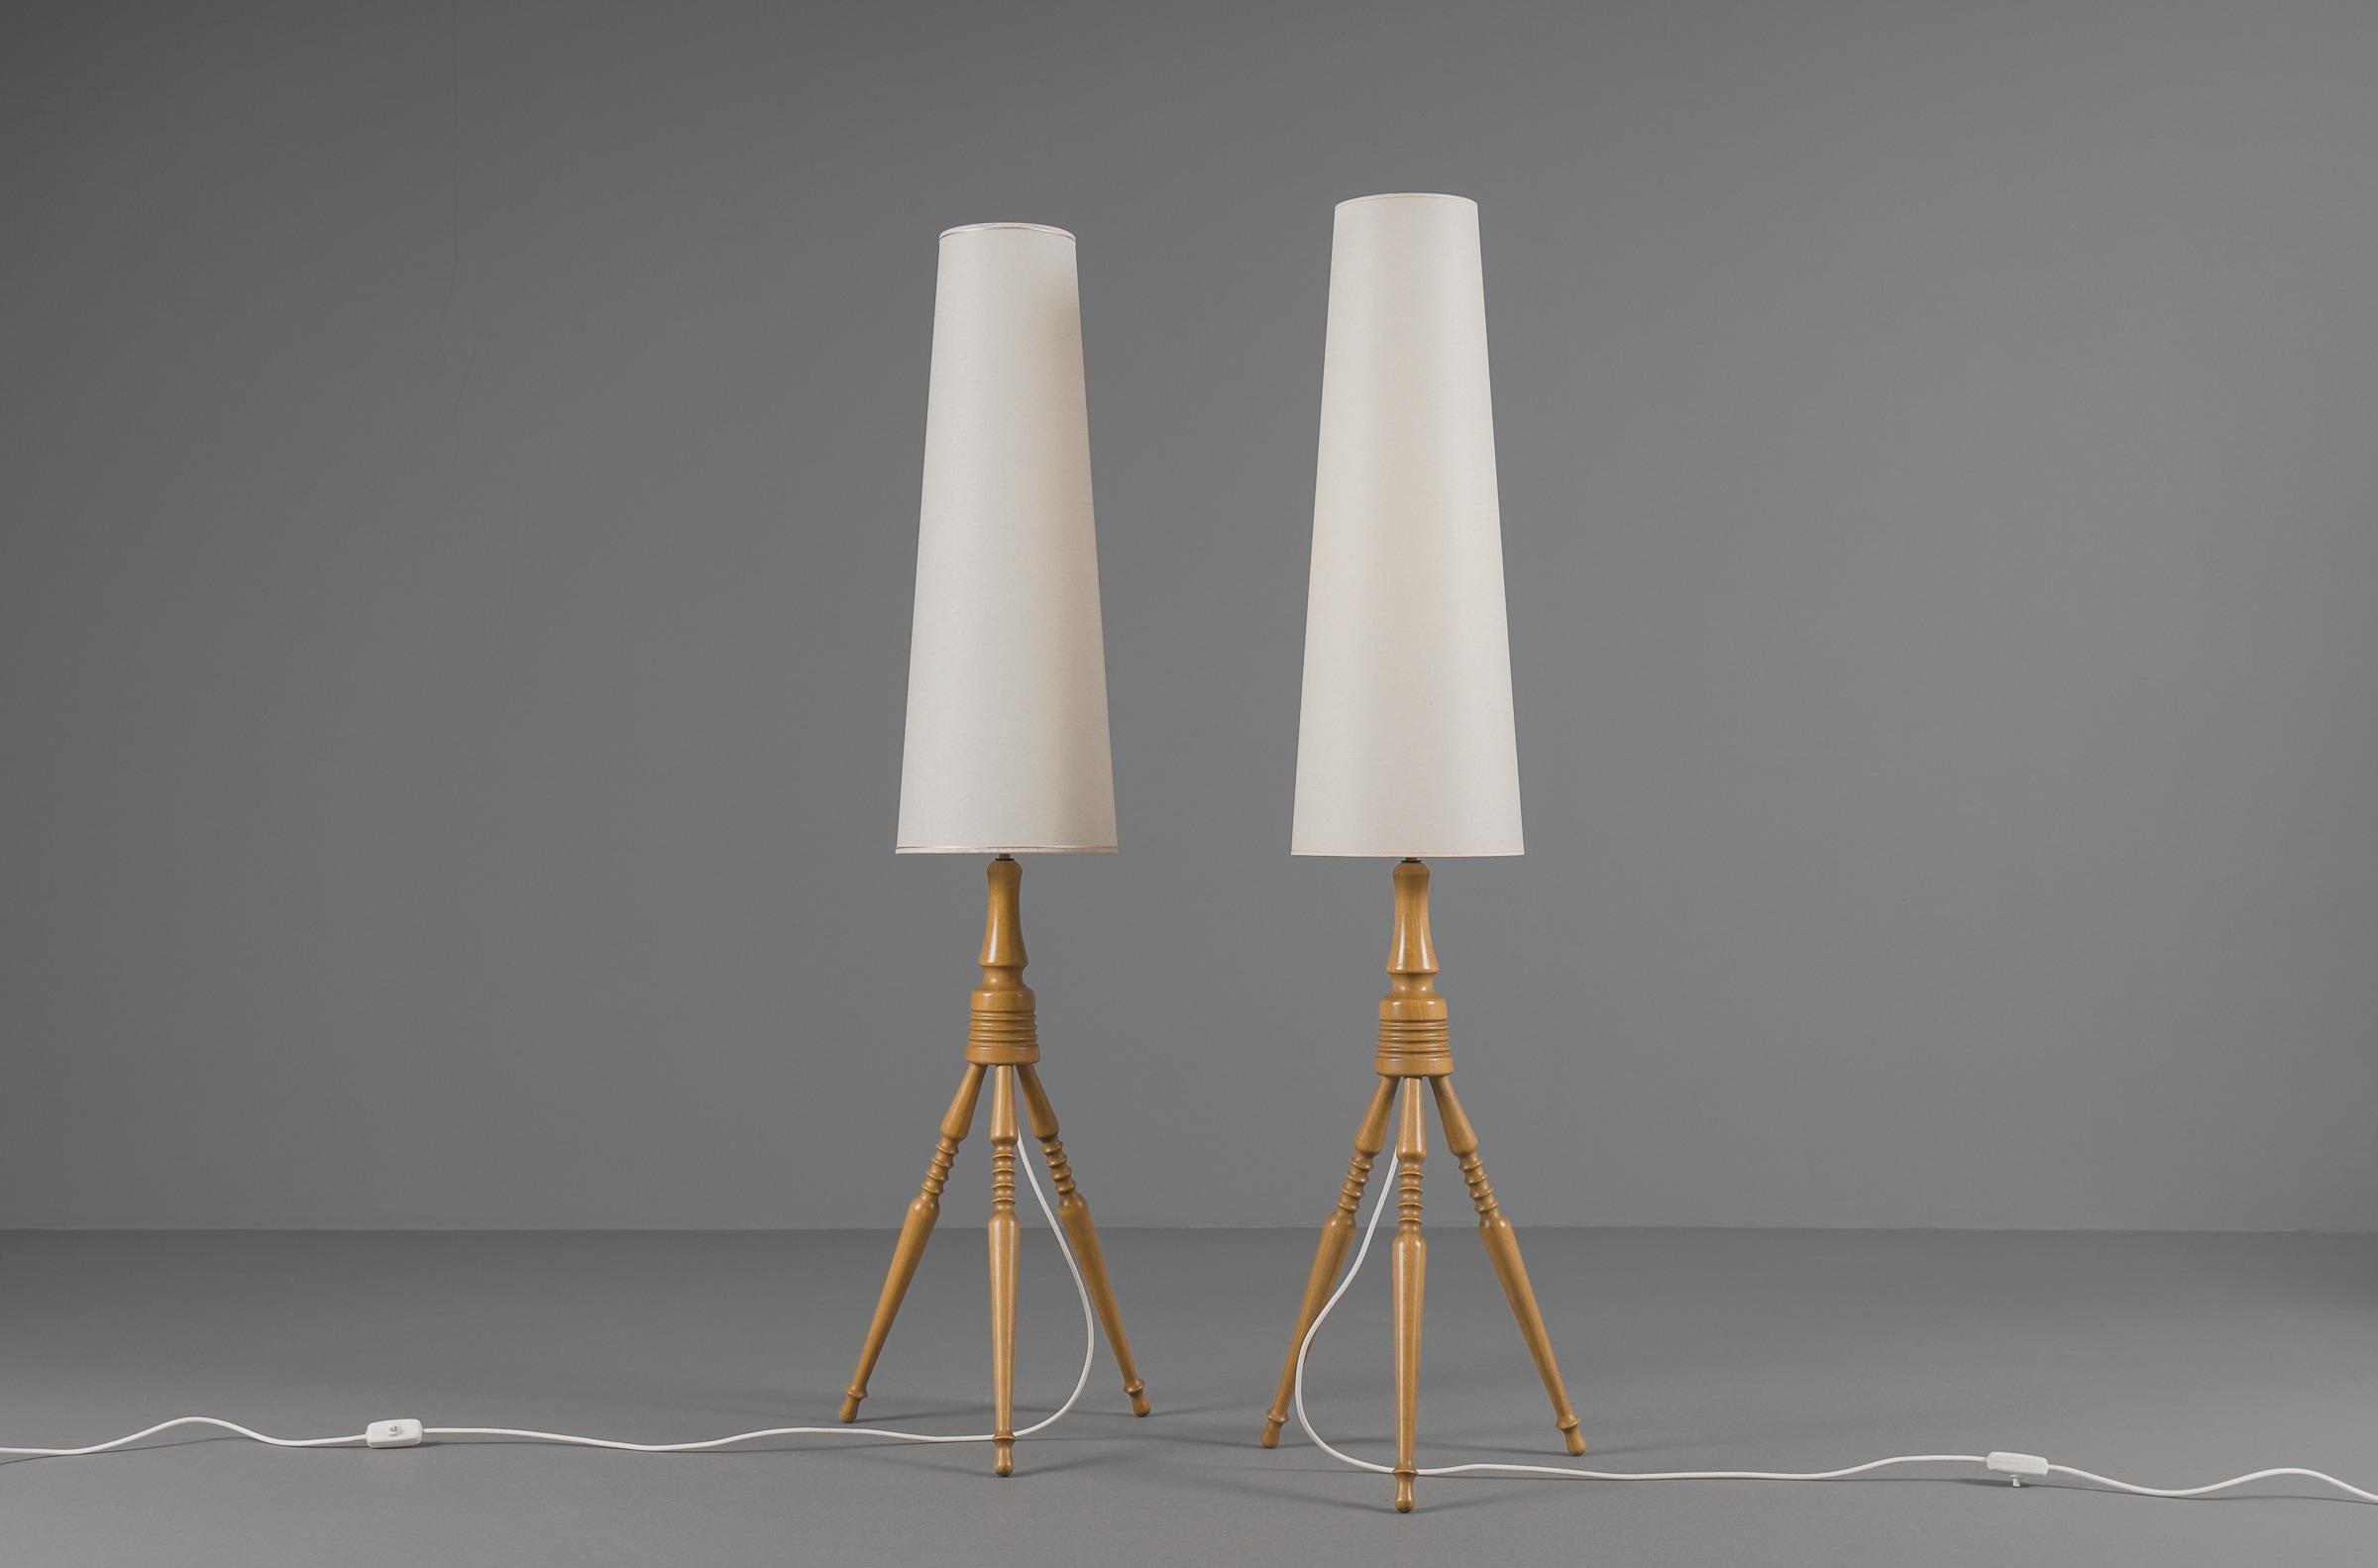 Lovely Pair Mid-Century Modern Floor Lamps in Wood, 1960s, France For Sale 6